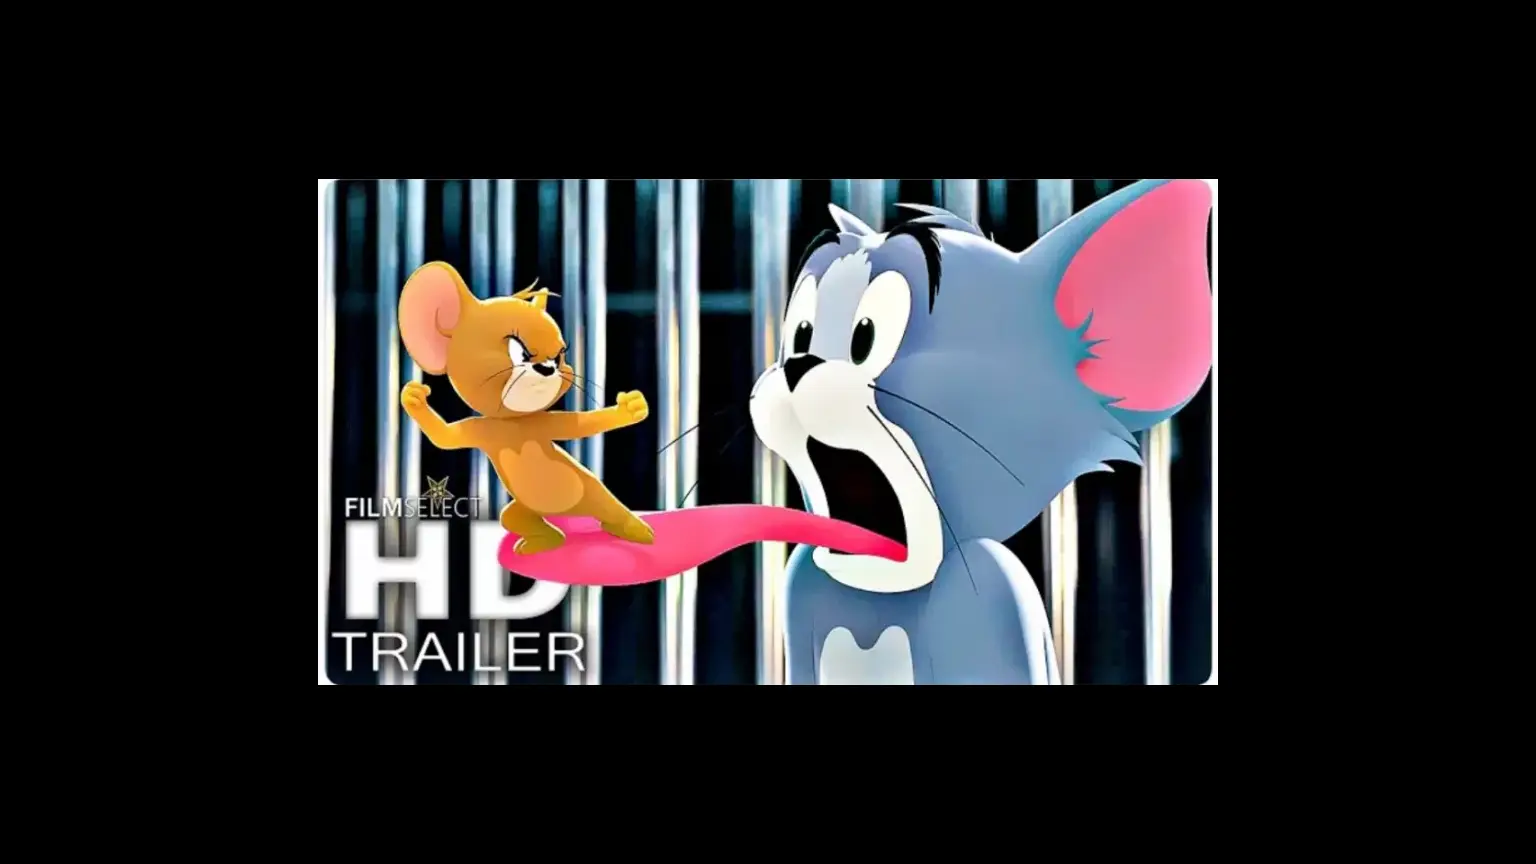 TOM AND JERRY Trailer 2 (New 2021) Animated Movie HD 